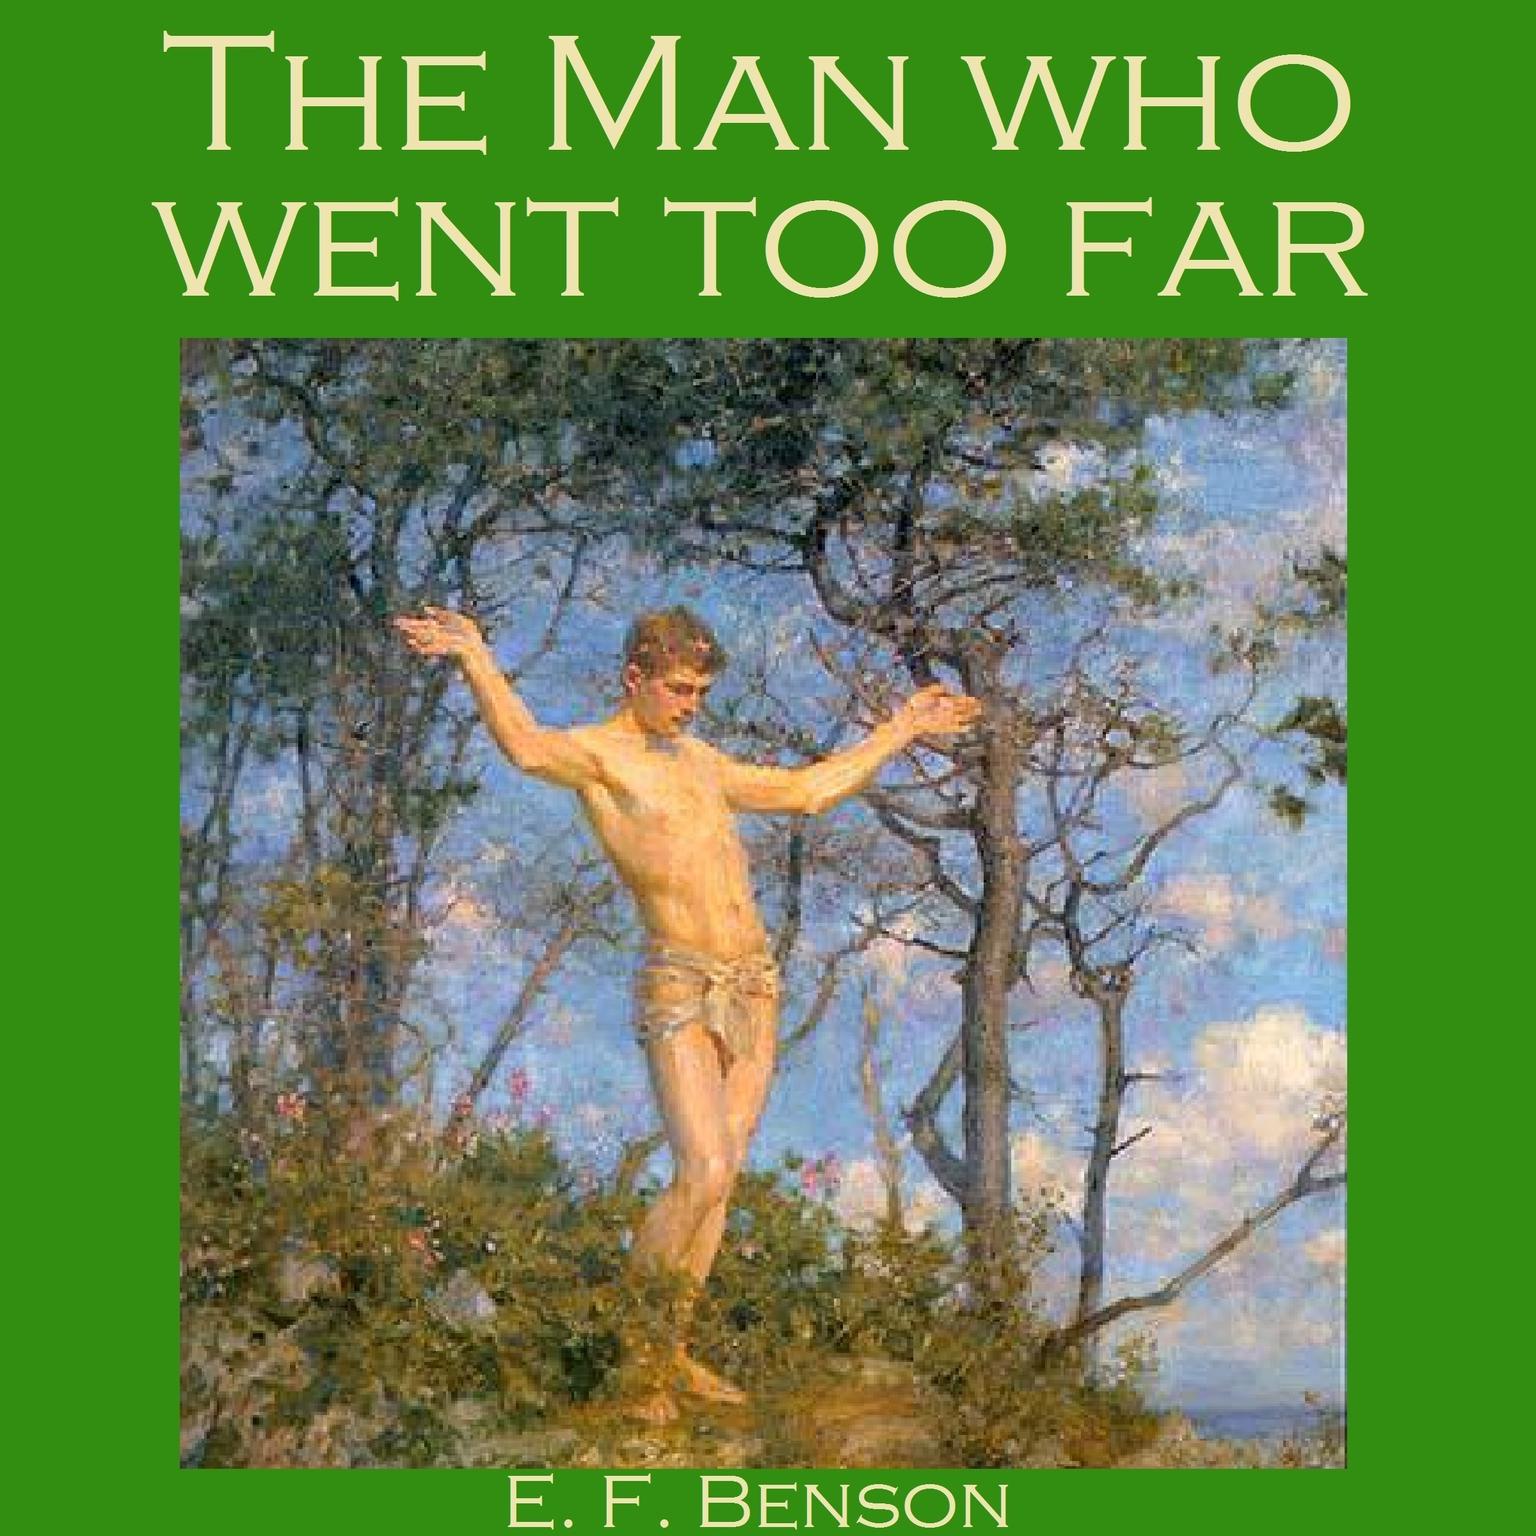 The Man Who Went Too Far Audiobook, by E. F. Benson